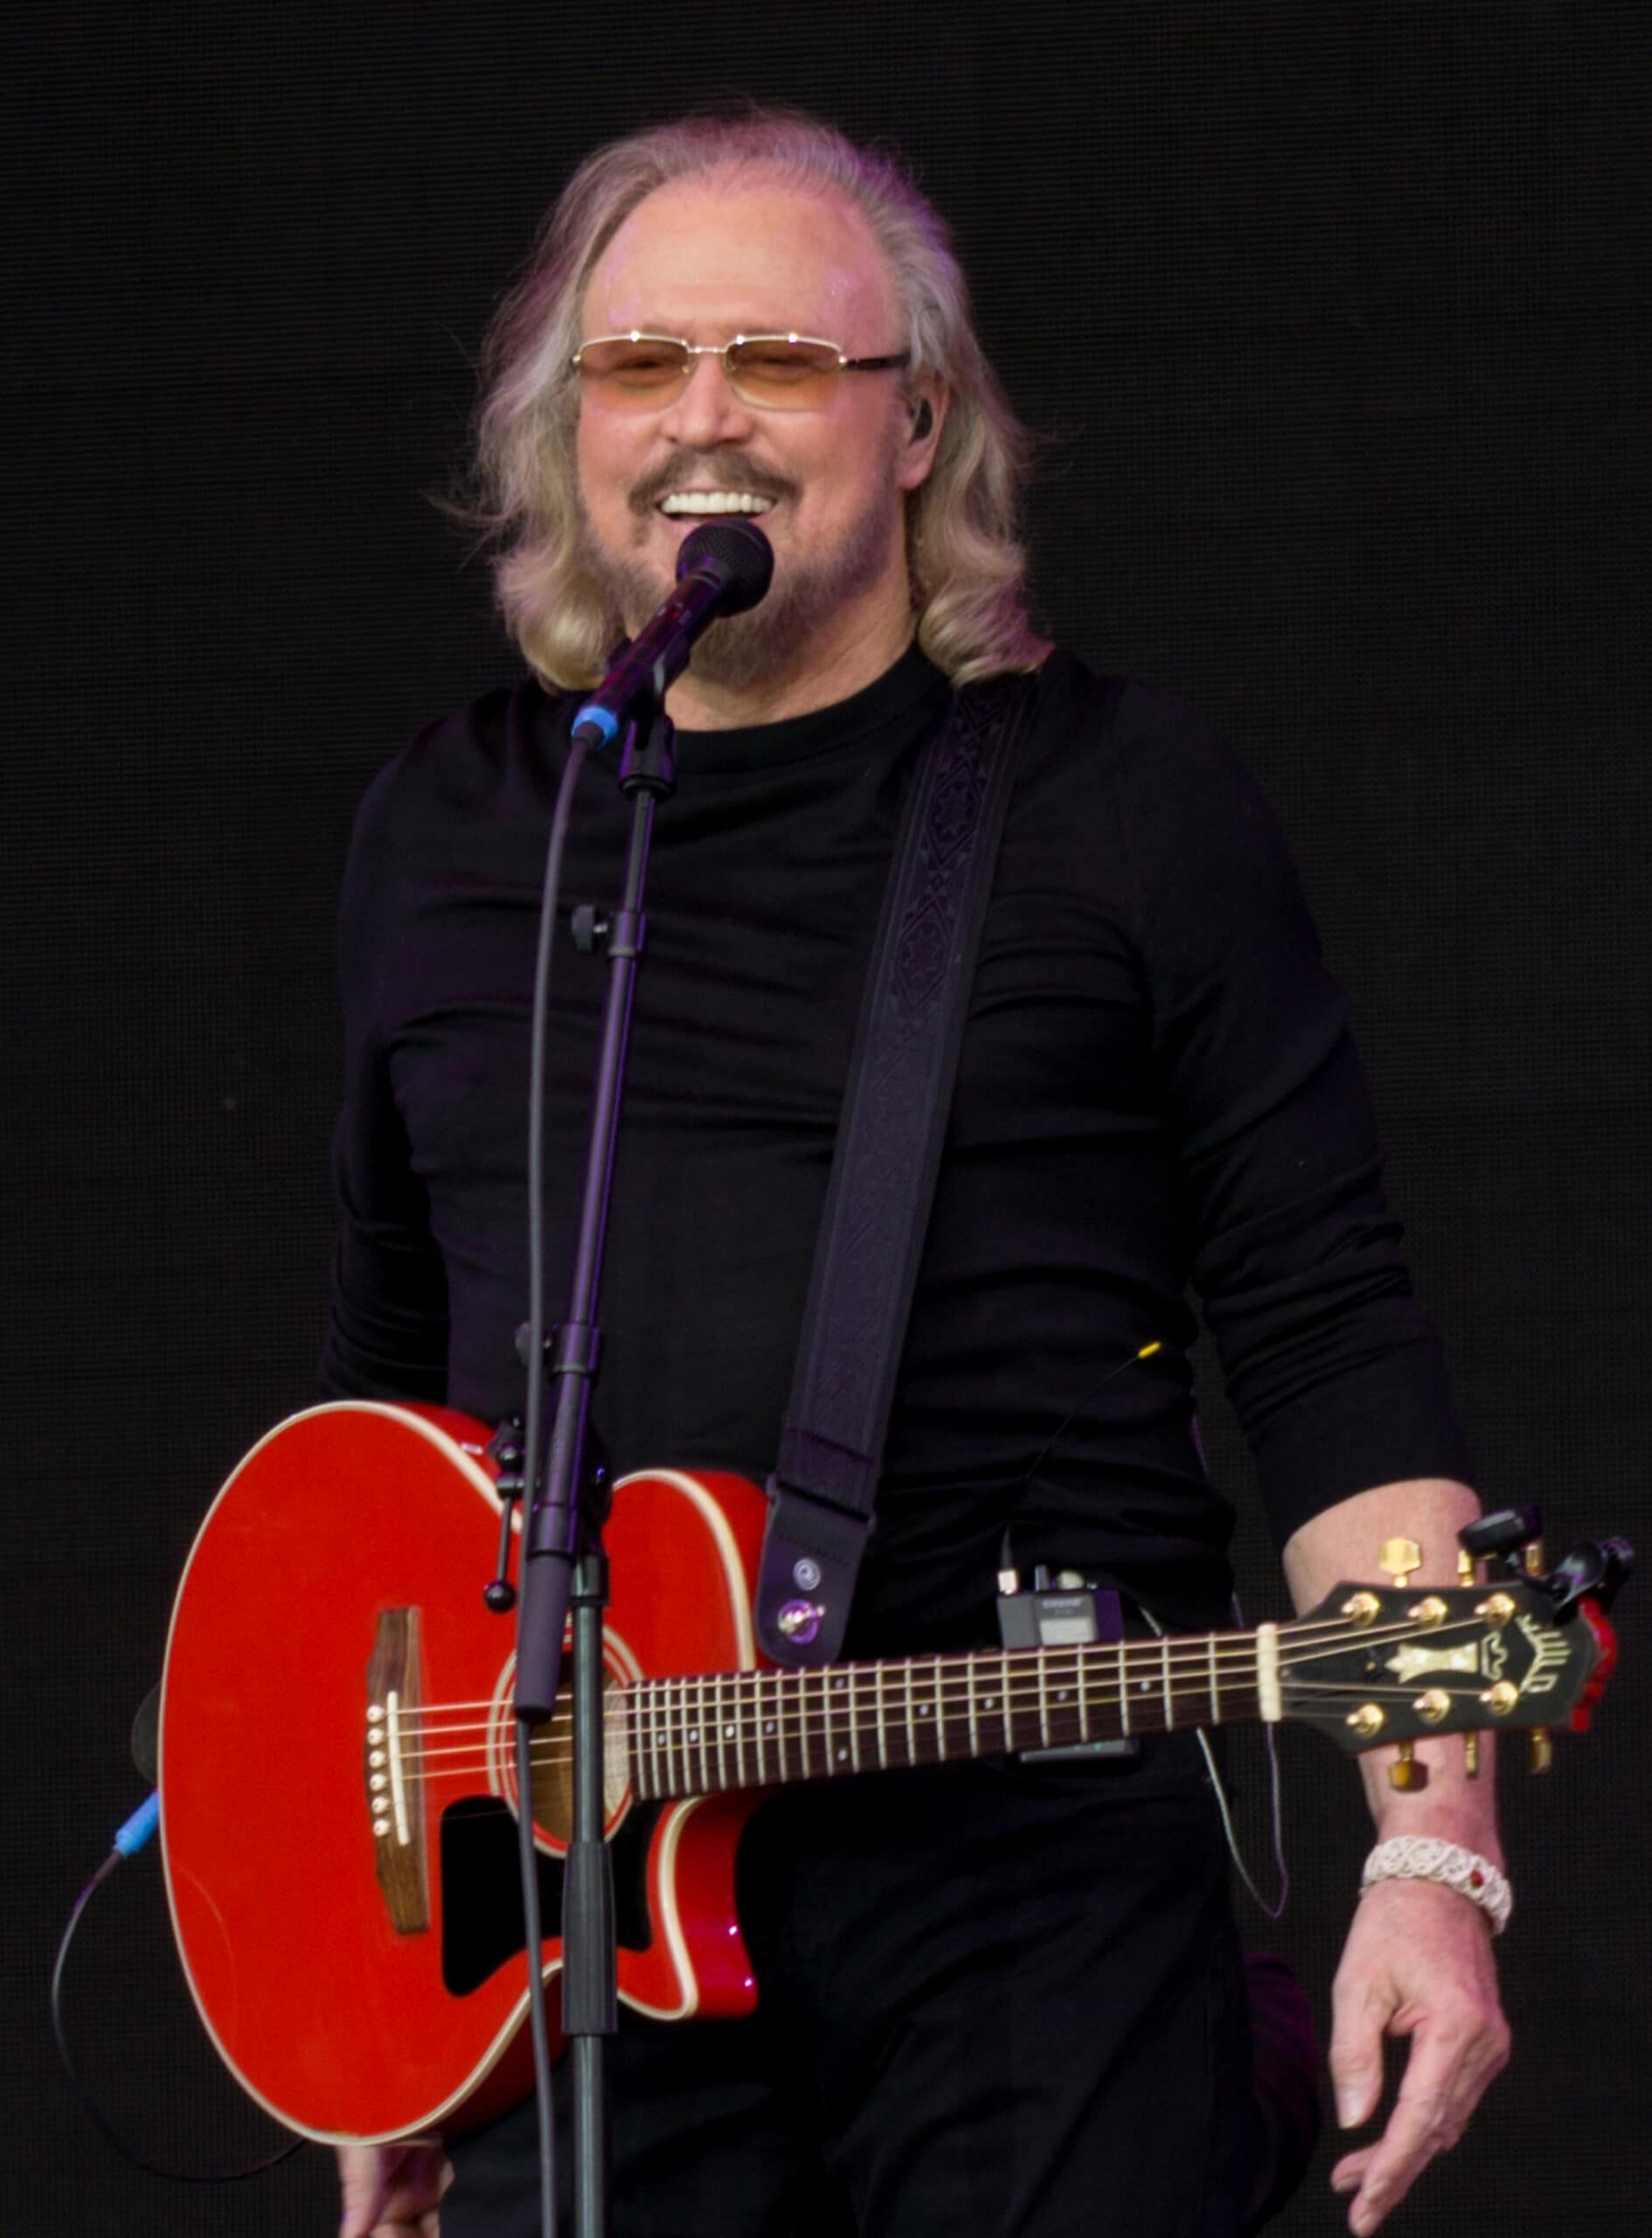 Bee Gees' Barry Gibb Announces New Album With Star-Studded Collaborations